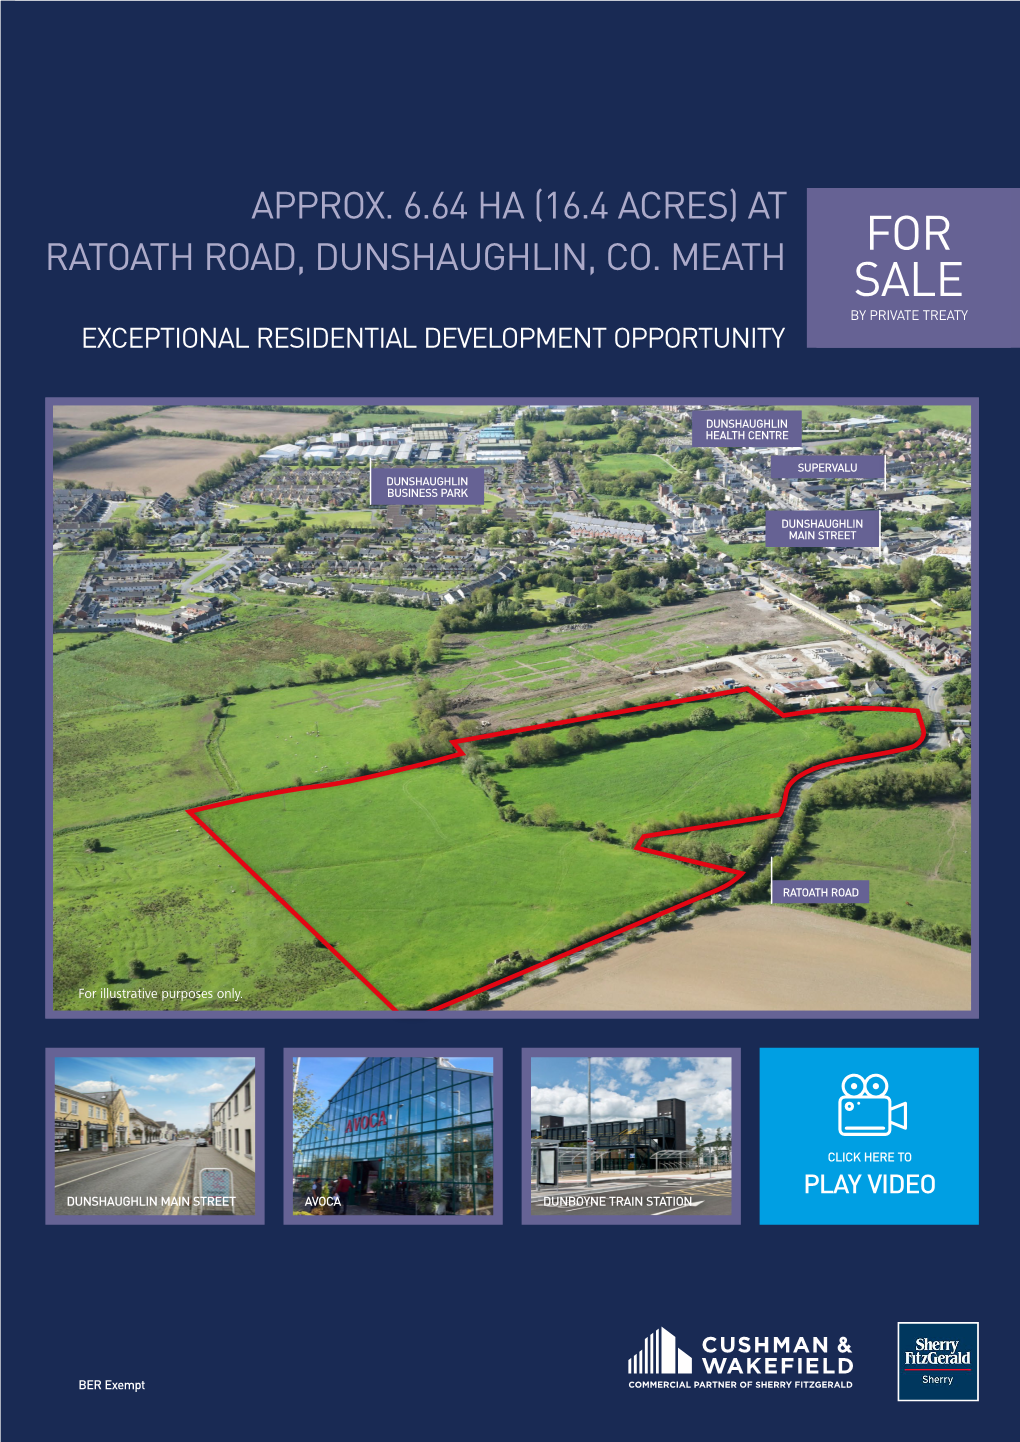 For Sale Ratoath Road, Dunshaughlin, Co